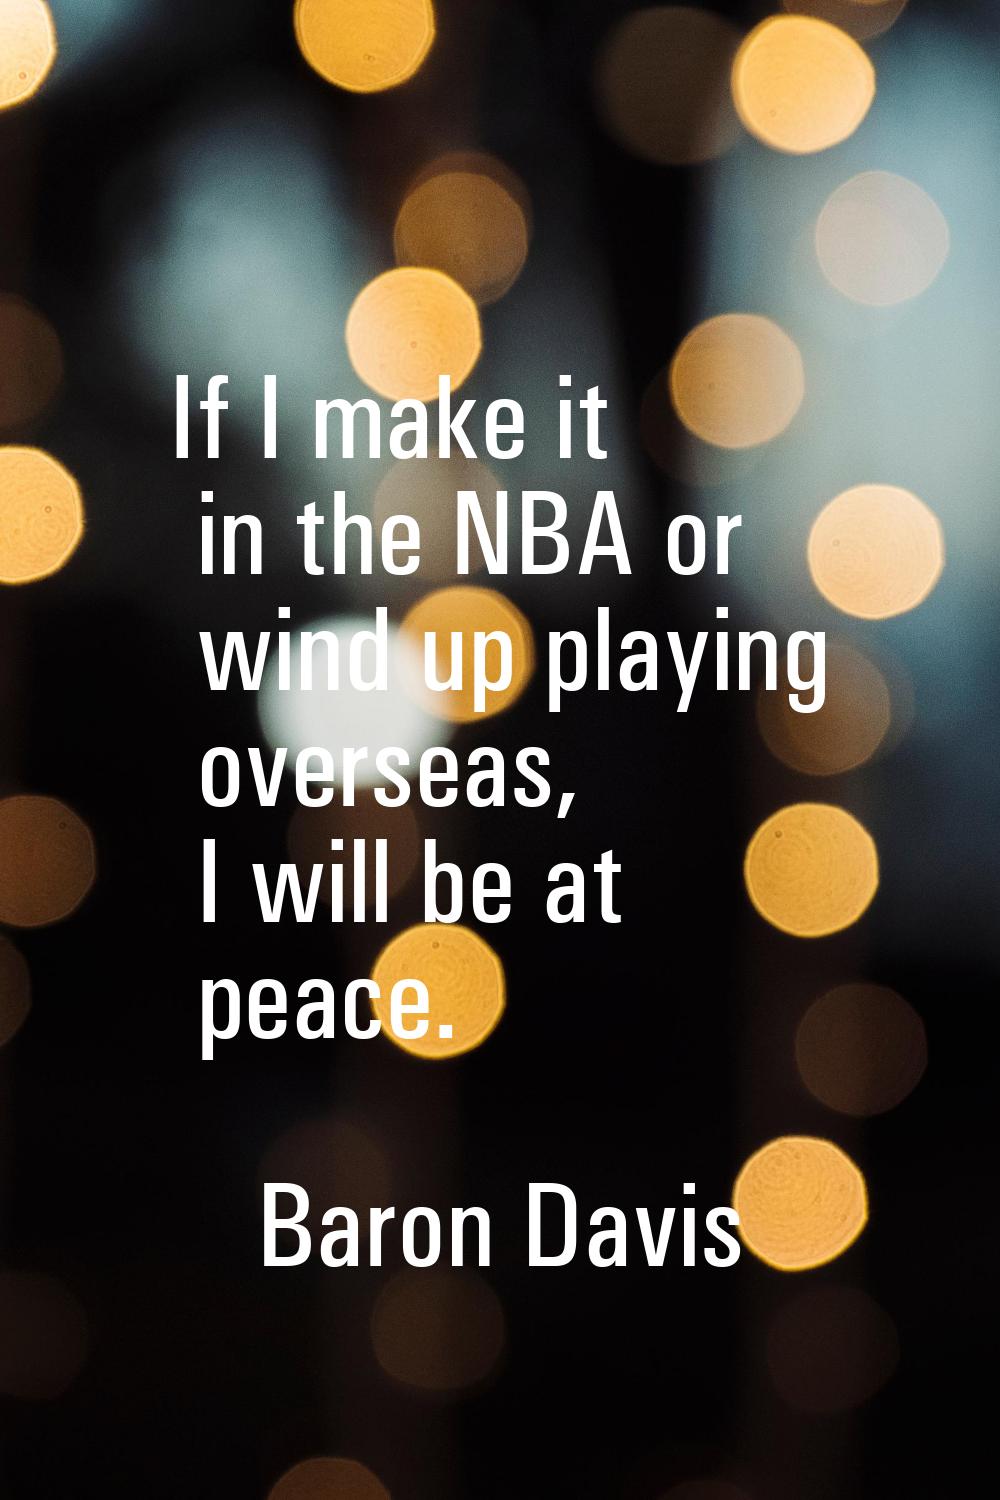 If I make it in the NBA or wind up playing overseas, I will be at peace.